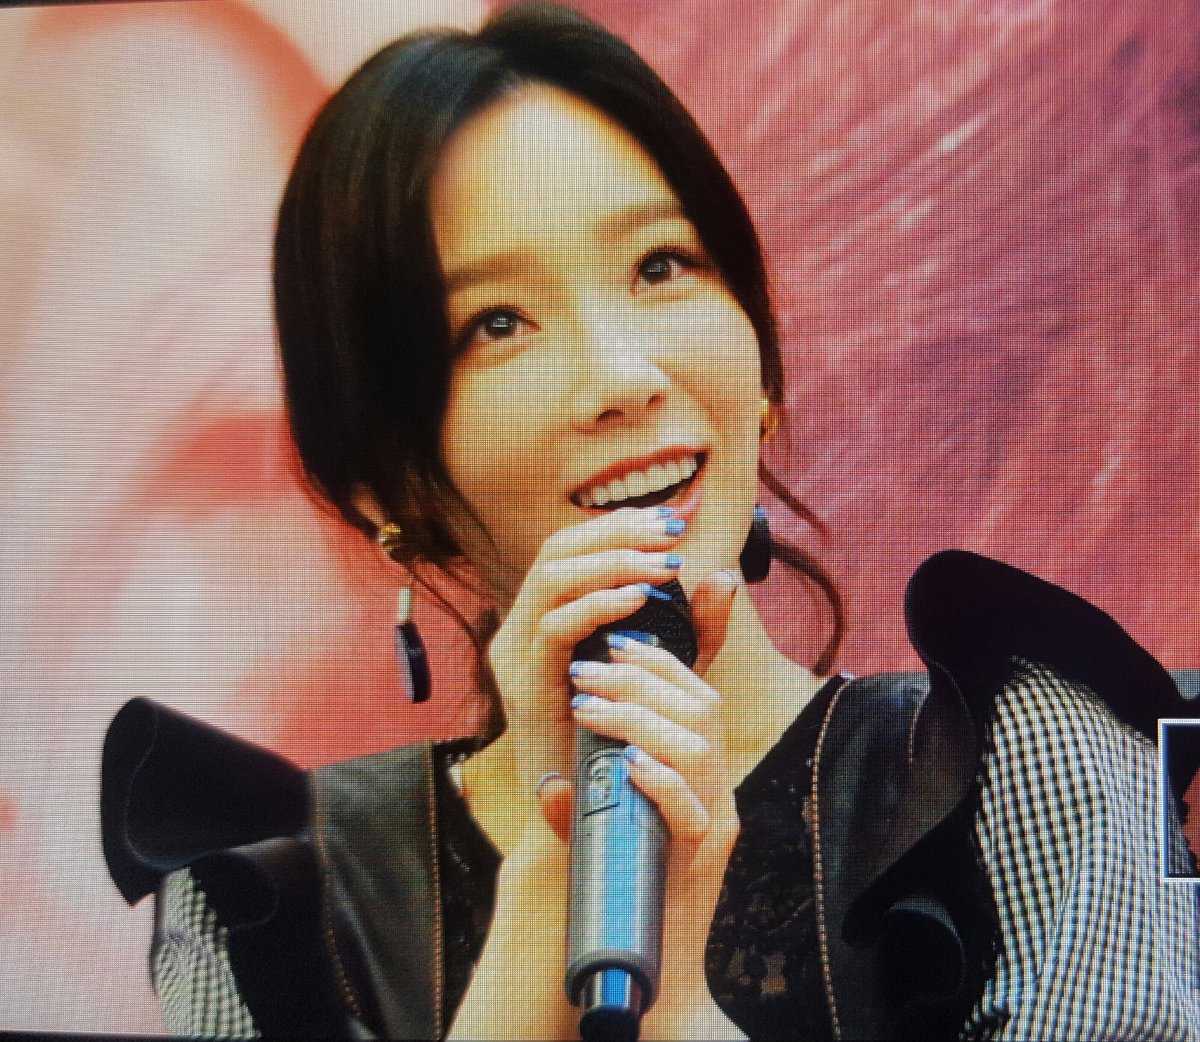 [PIC][16-04-2017]TaeYeon tham dự buổi Fansign cho “MY VOICE DELUXE EDITION” tại AK PLAZA vào chiều nay  - Page 2 C9hwz6WU0AAf_so